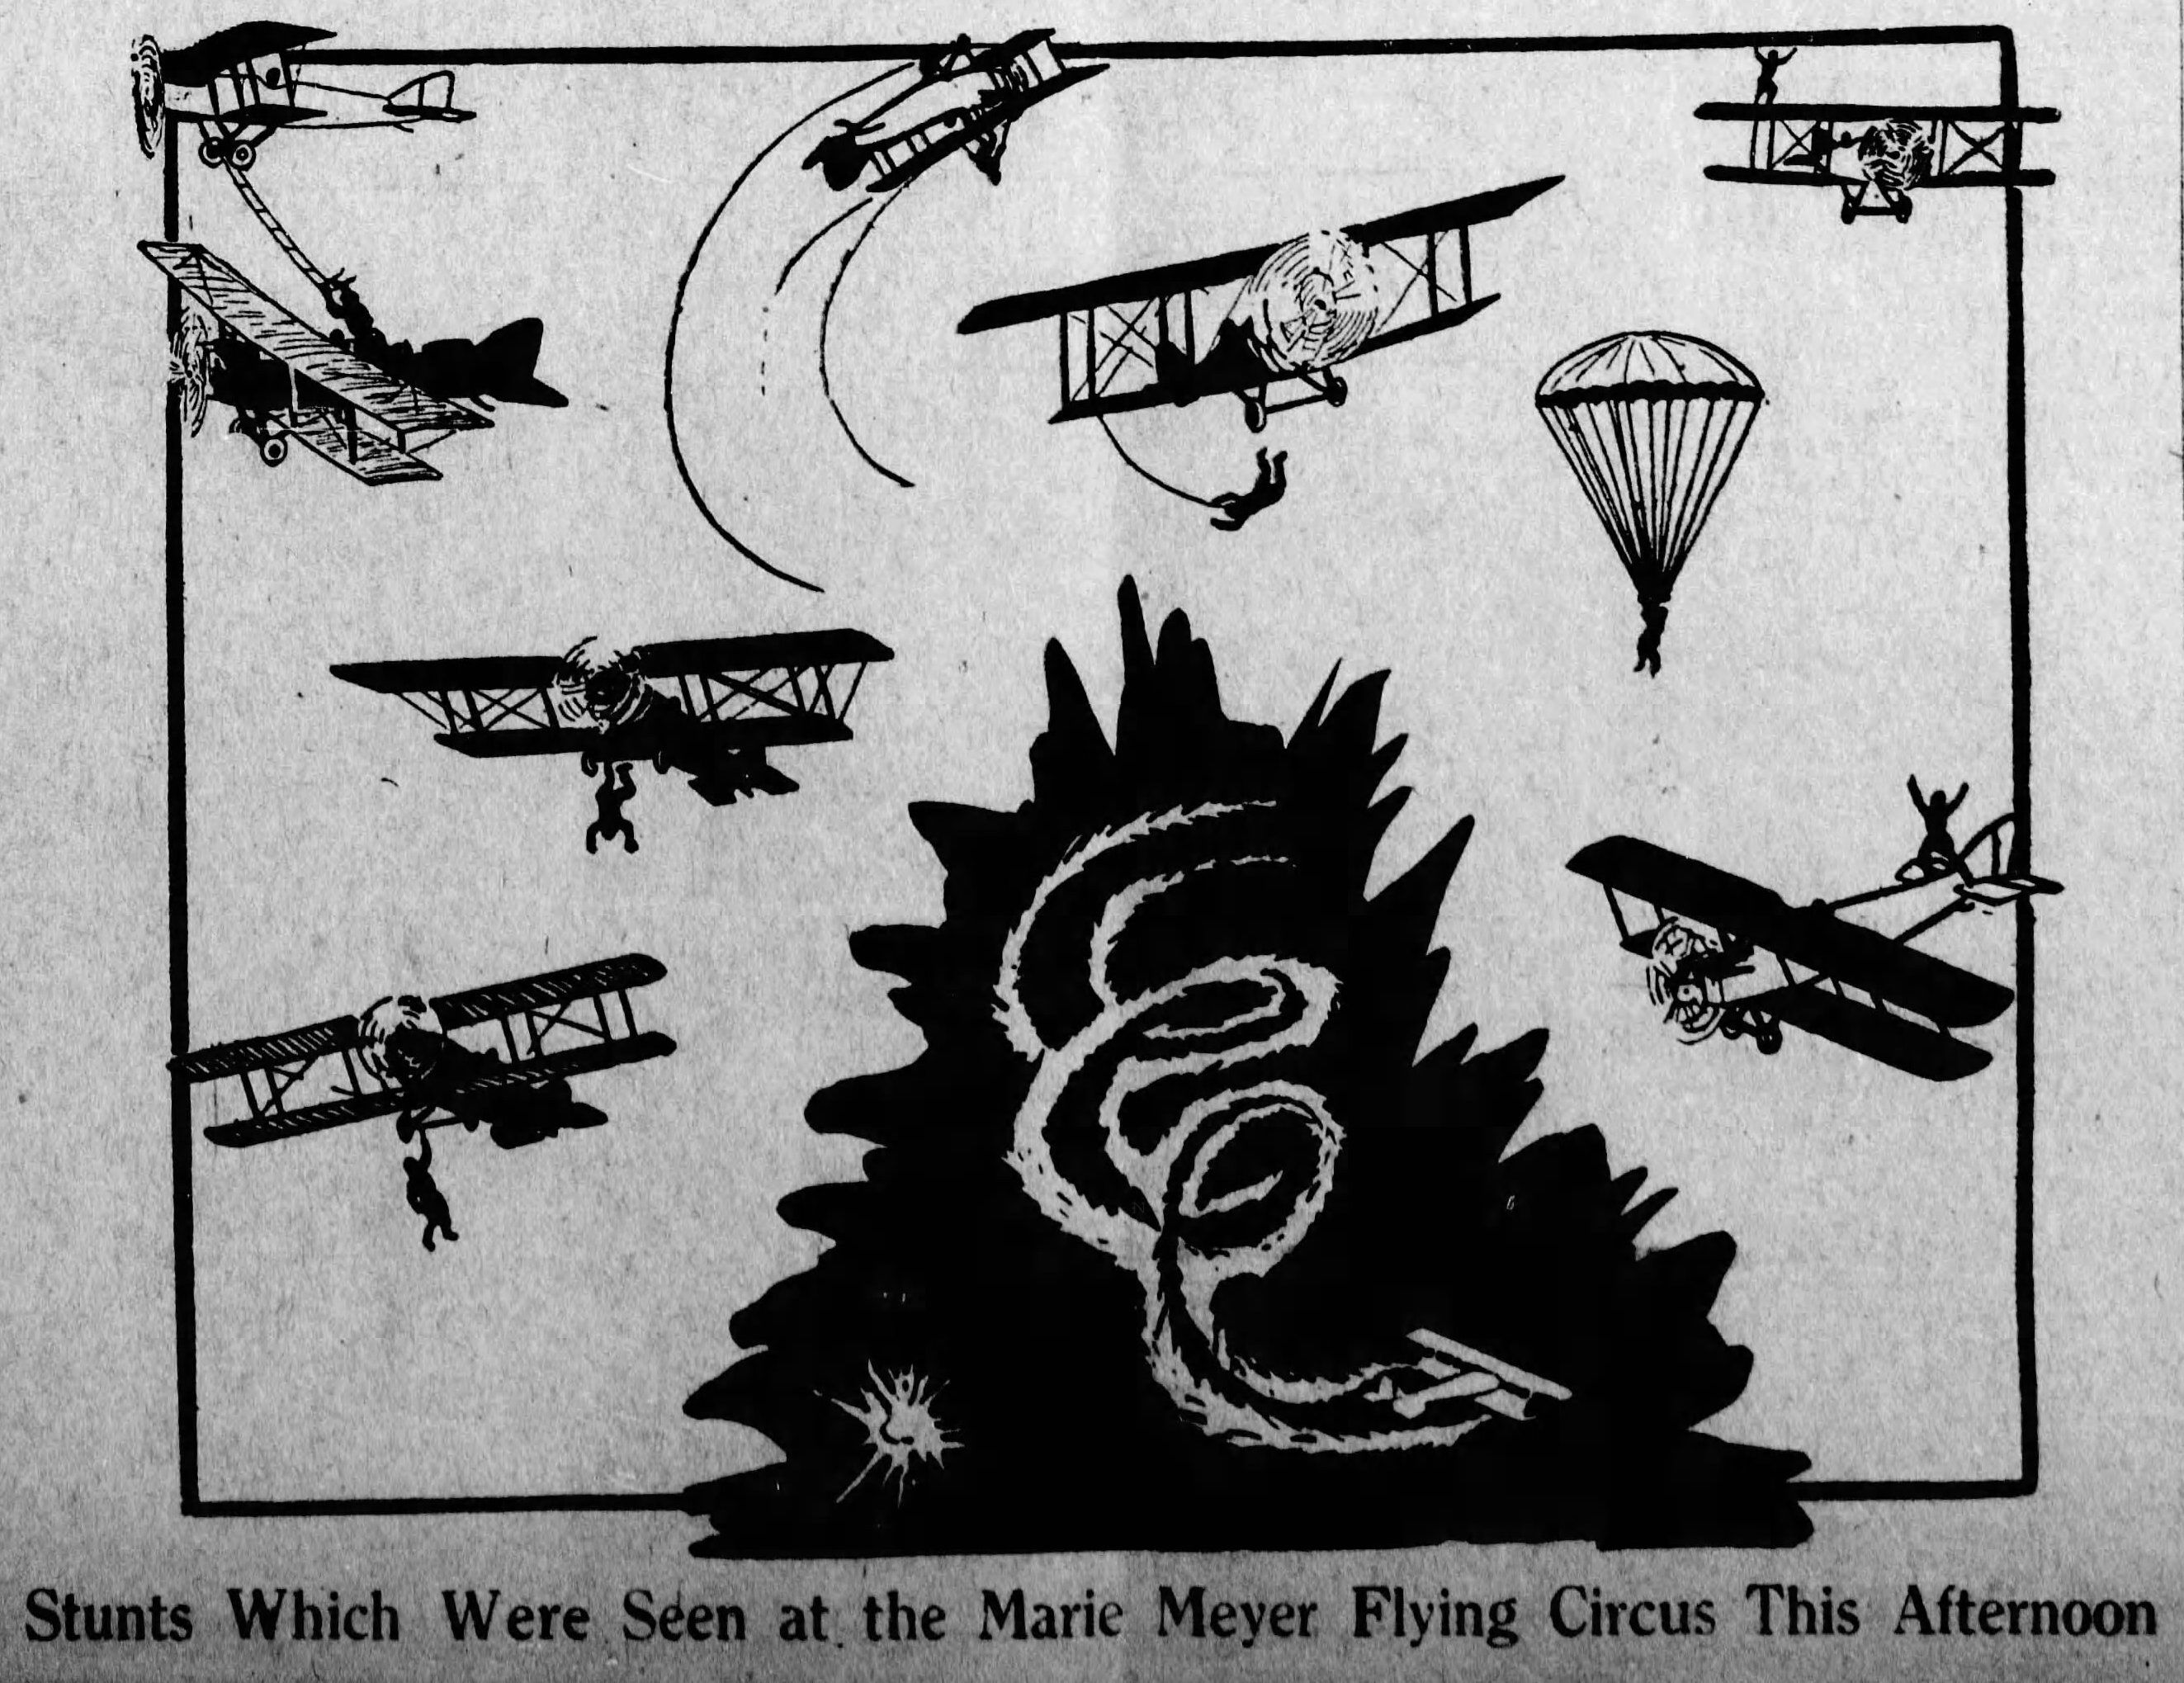 A poster of the stunts which were seen at the Marie Meyer Flying Circus in 1924.